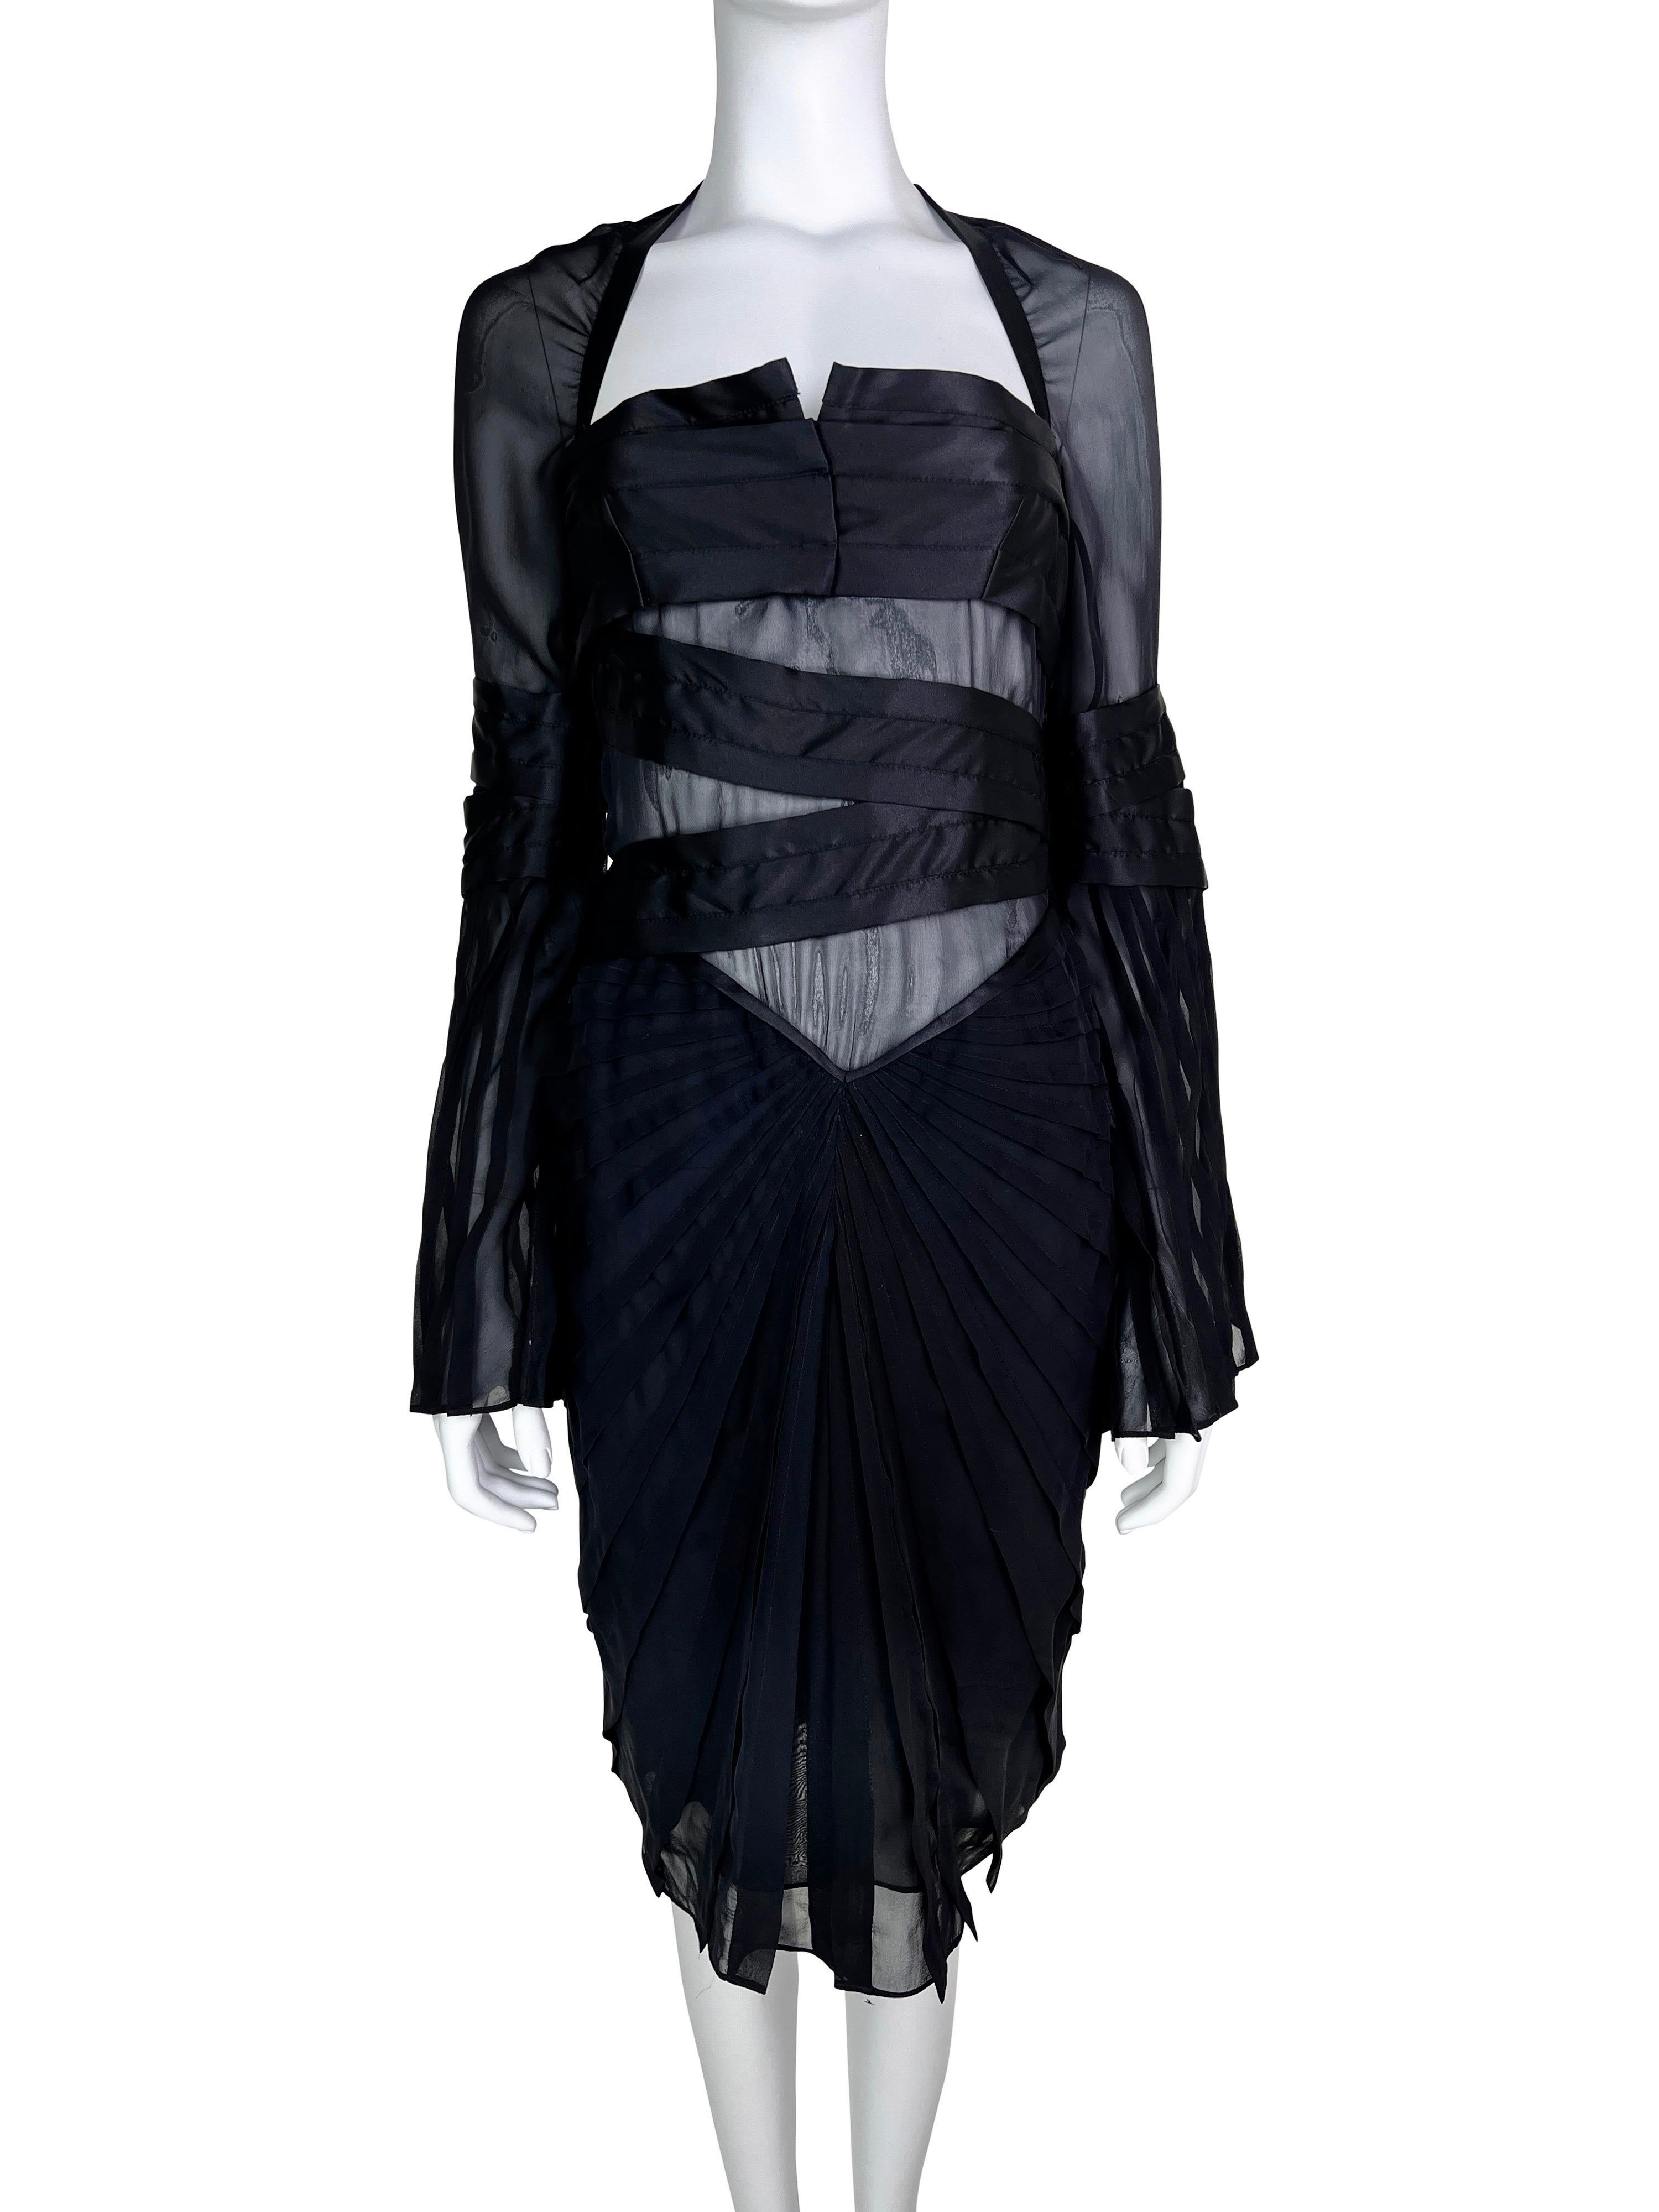 Gucci by Tom Ford Fall 2004 Pleated Bondage Silk Dress For Sale 1